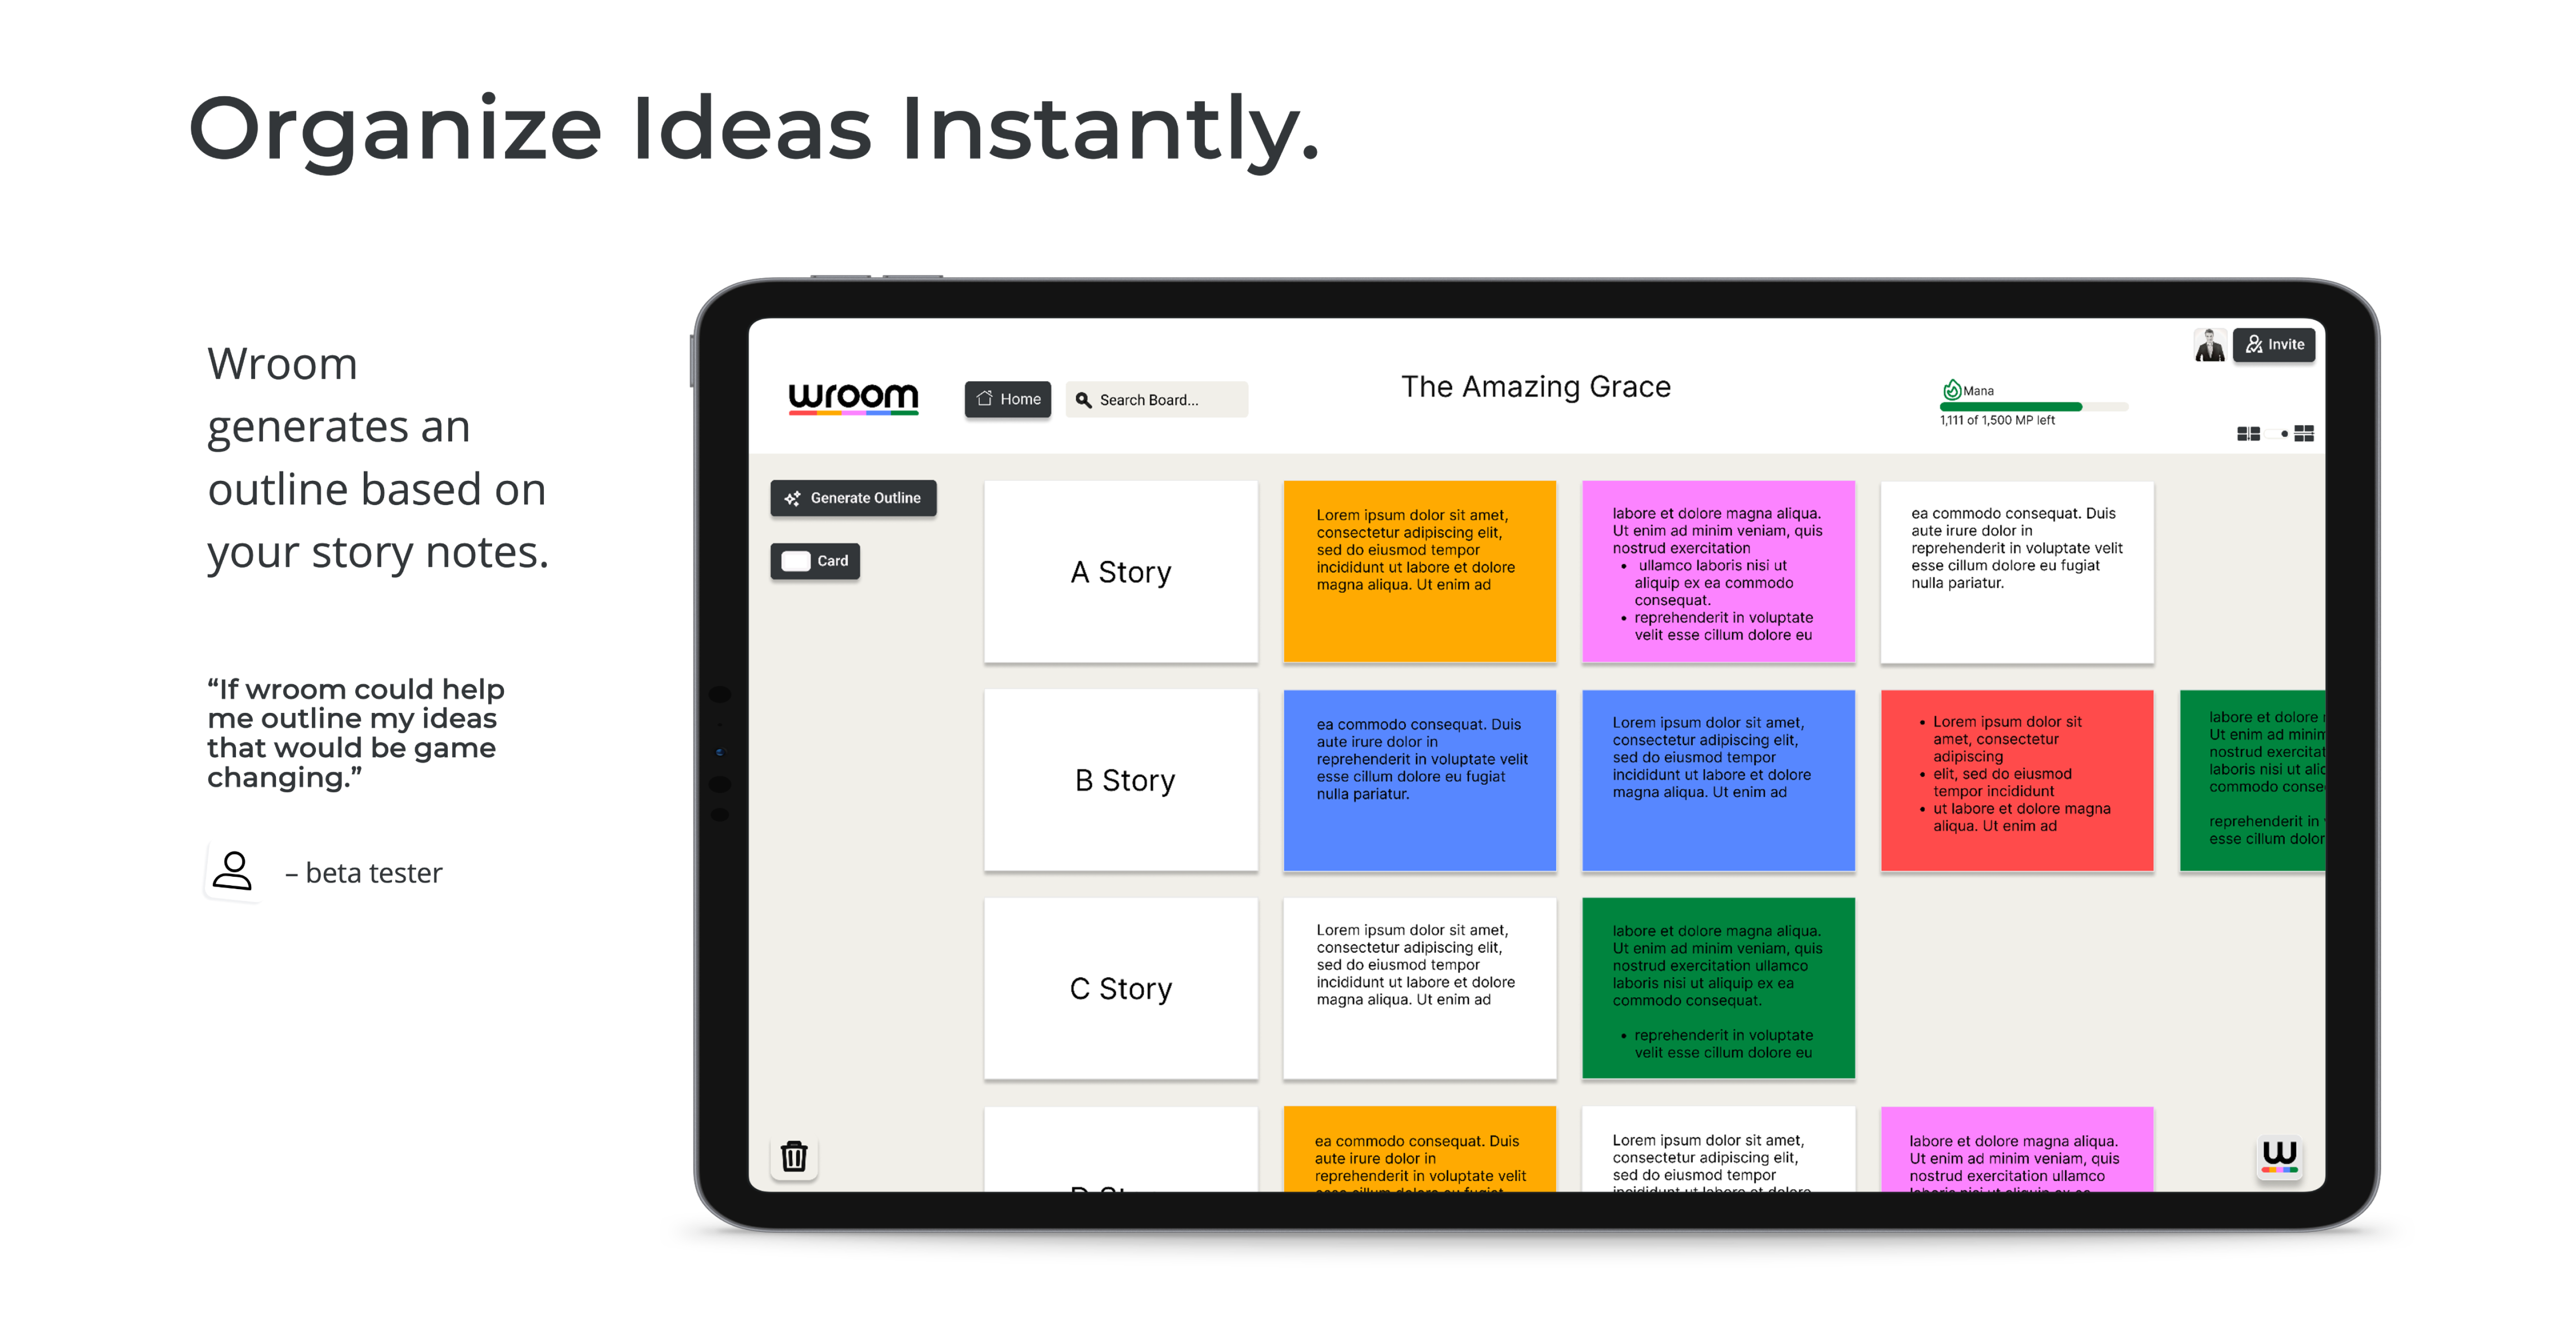 Organize Ideas Instantly.

Wroom generates an outline based on your story notes.

quote from an early beta tester. “If wroom could help me outline my ideas that would be game changing.”
